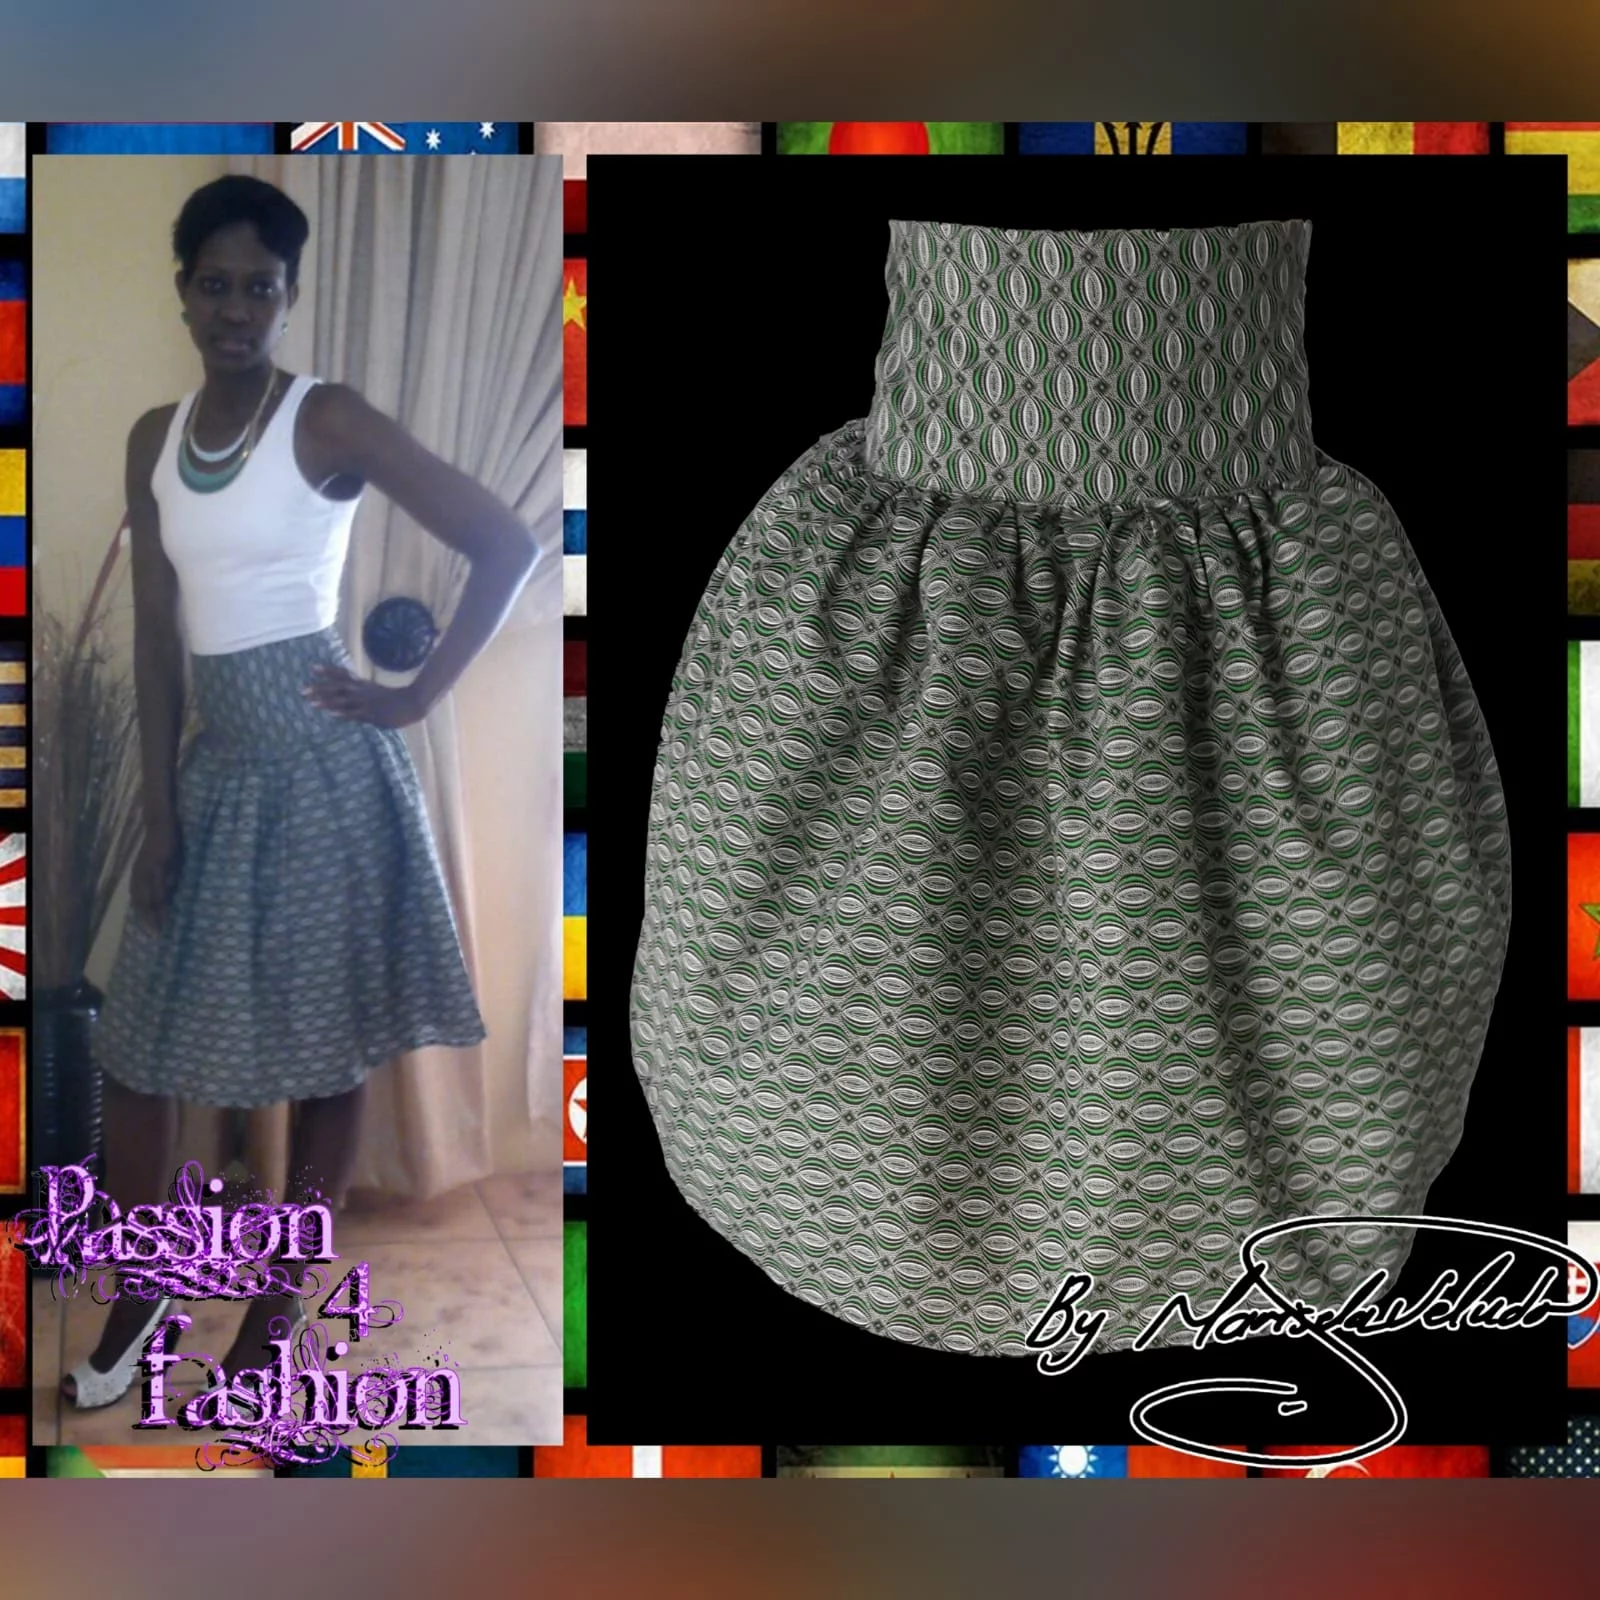 Green gathered high waist traditional skirt in xhosa print 3 a green patterned african gathered high waisted traditional skirt.